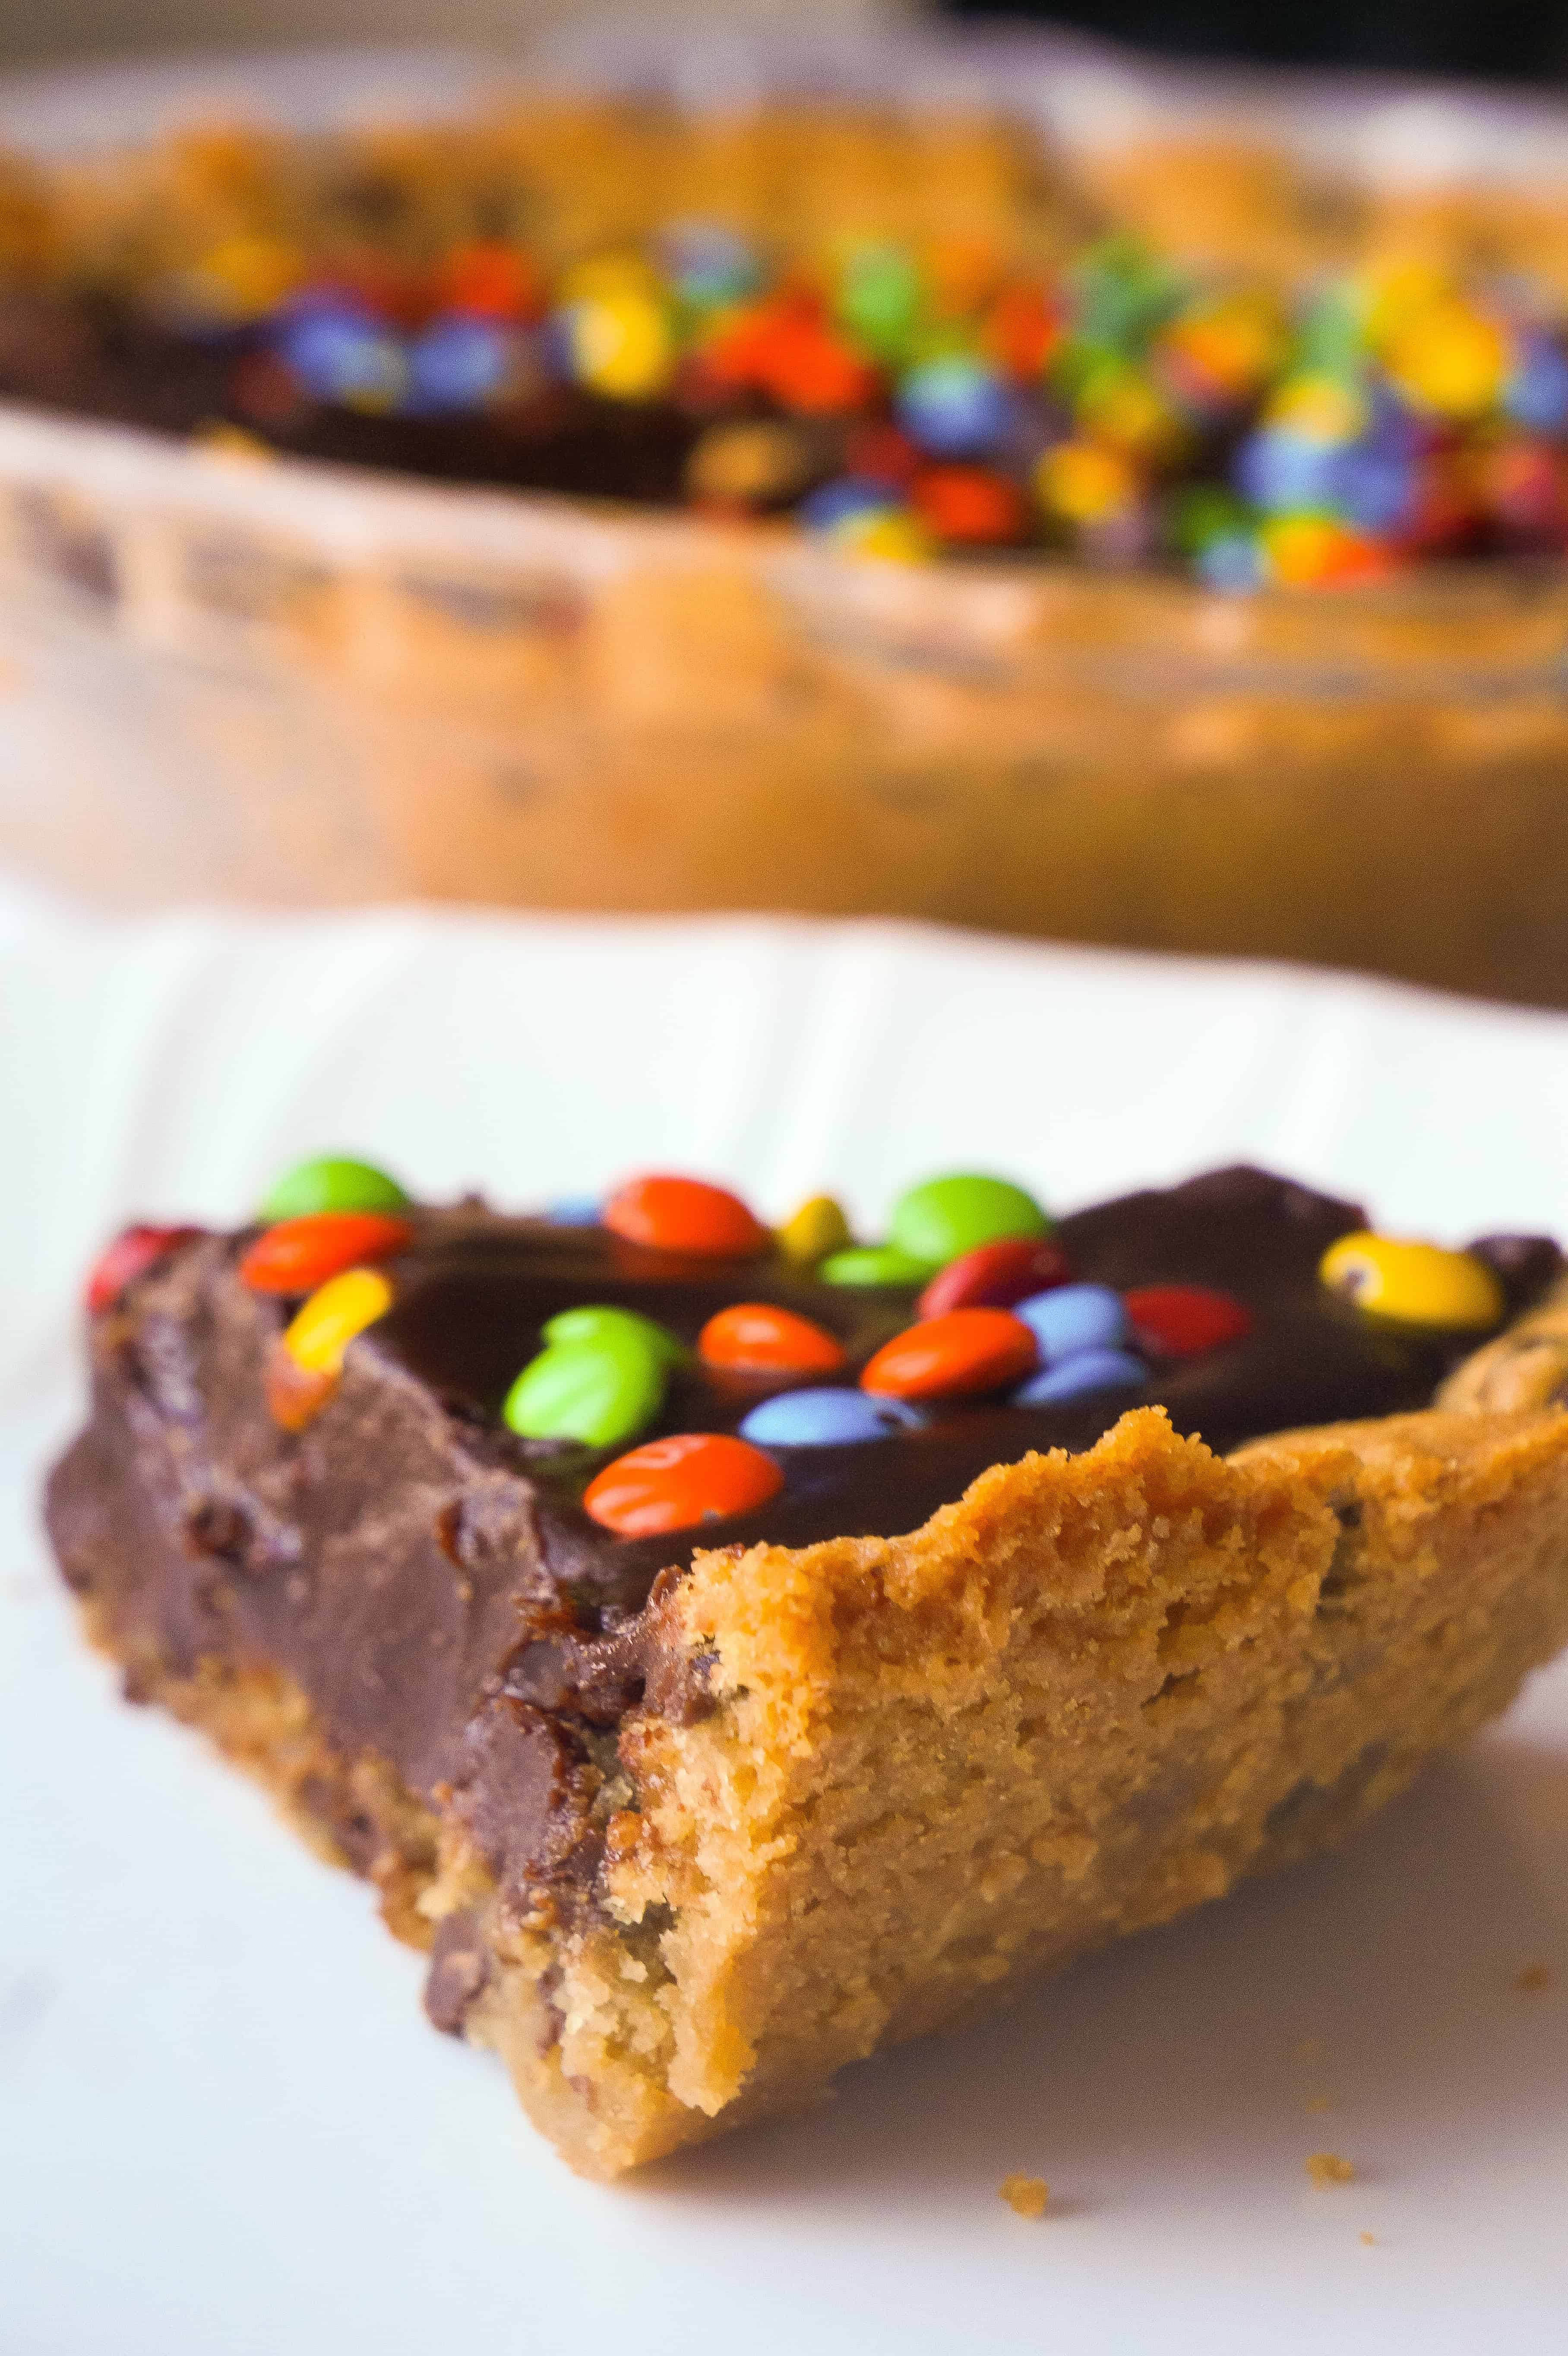 Chocolate Fudge Cookie Pie is a decadent dessert for chocolate lovers. This easy pie recipe starts with a chocolate chip cookie crust with a creamy chocolate filling and is topped with mini M&Ms.